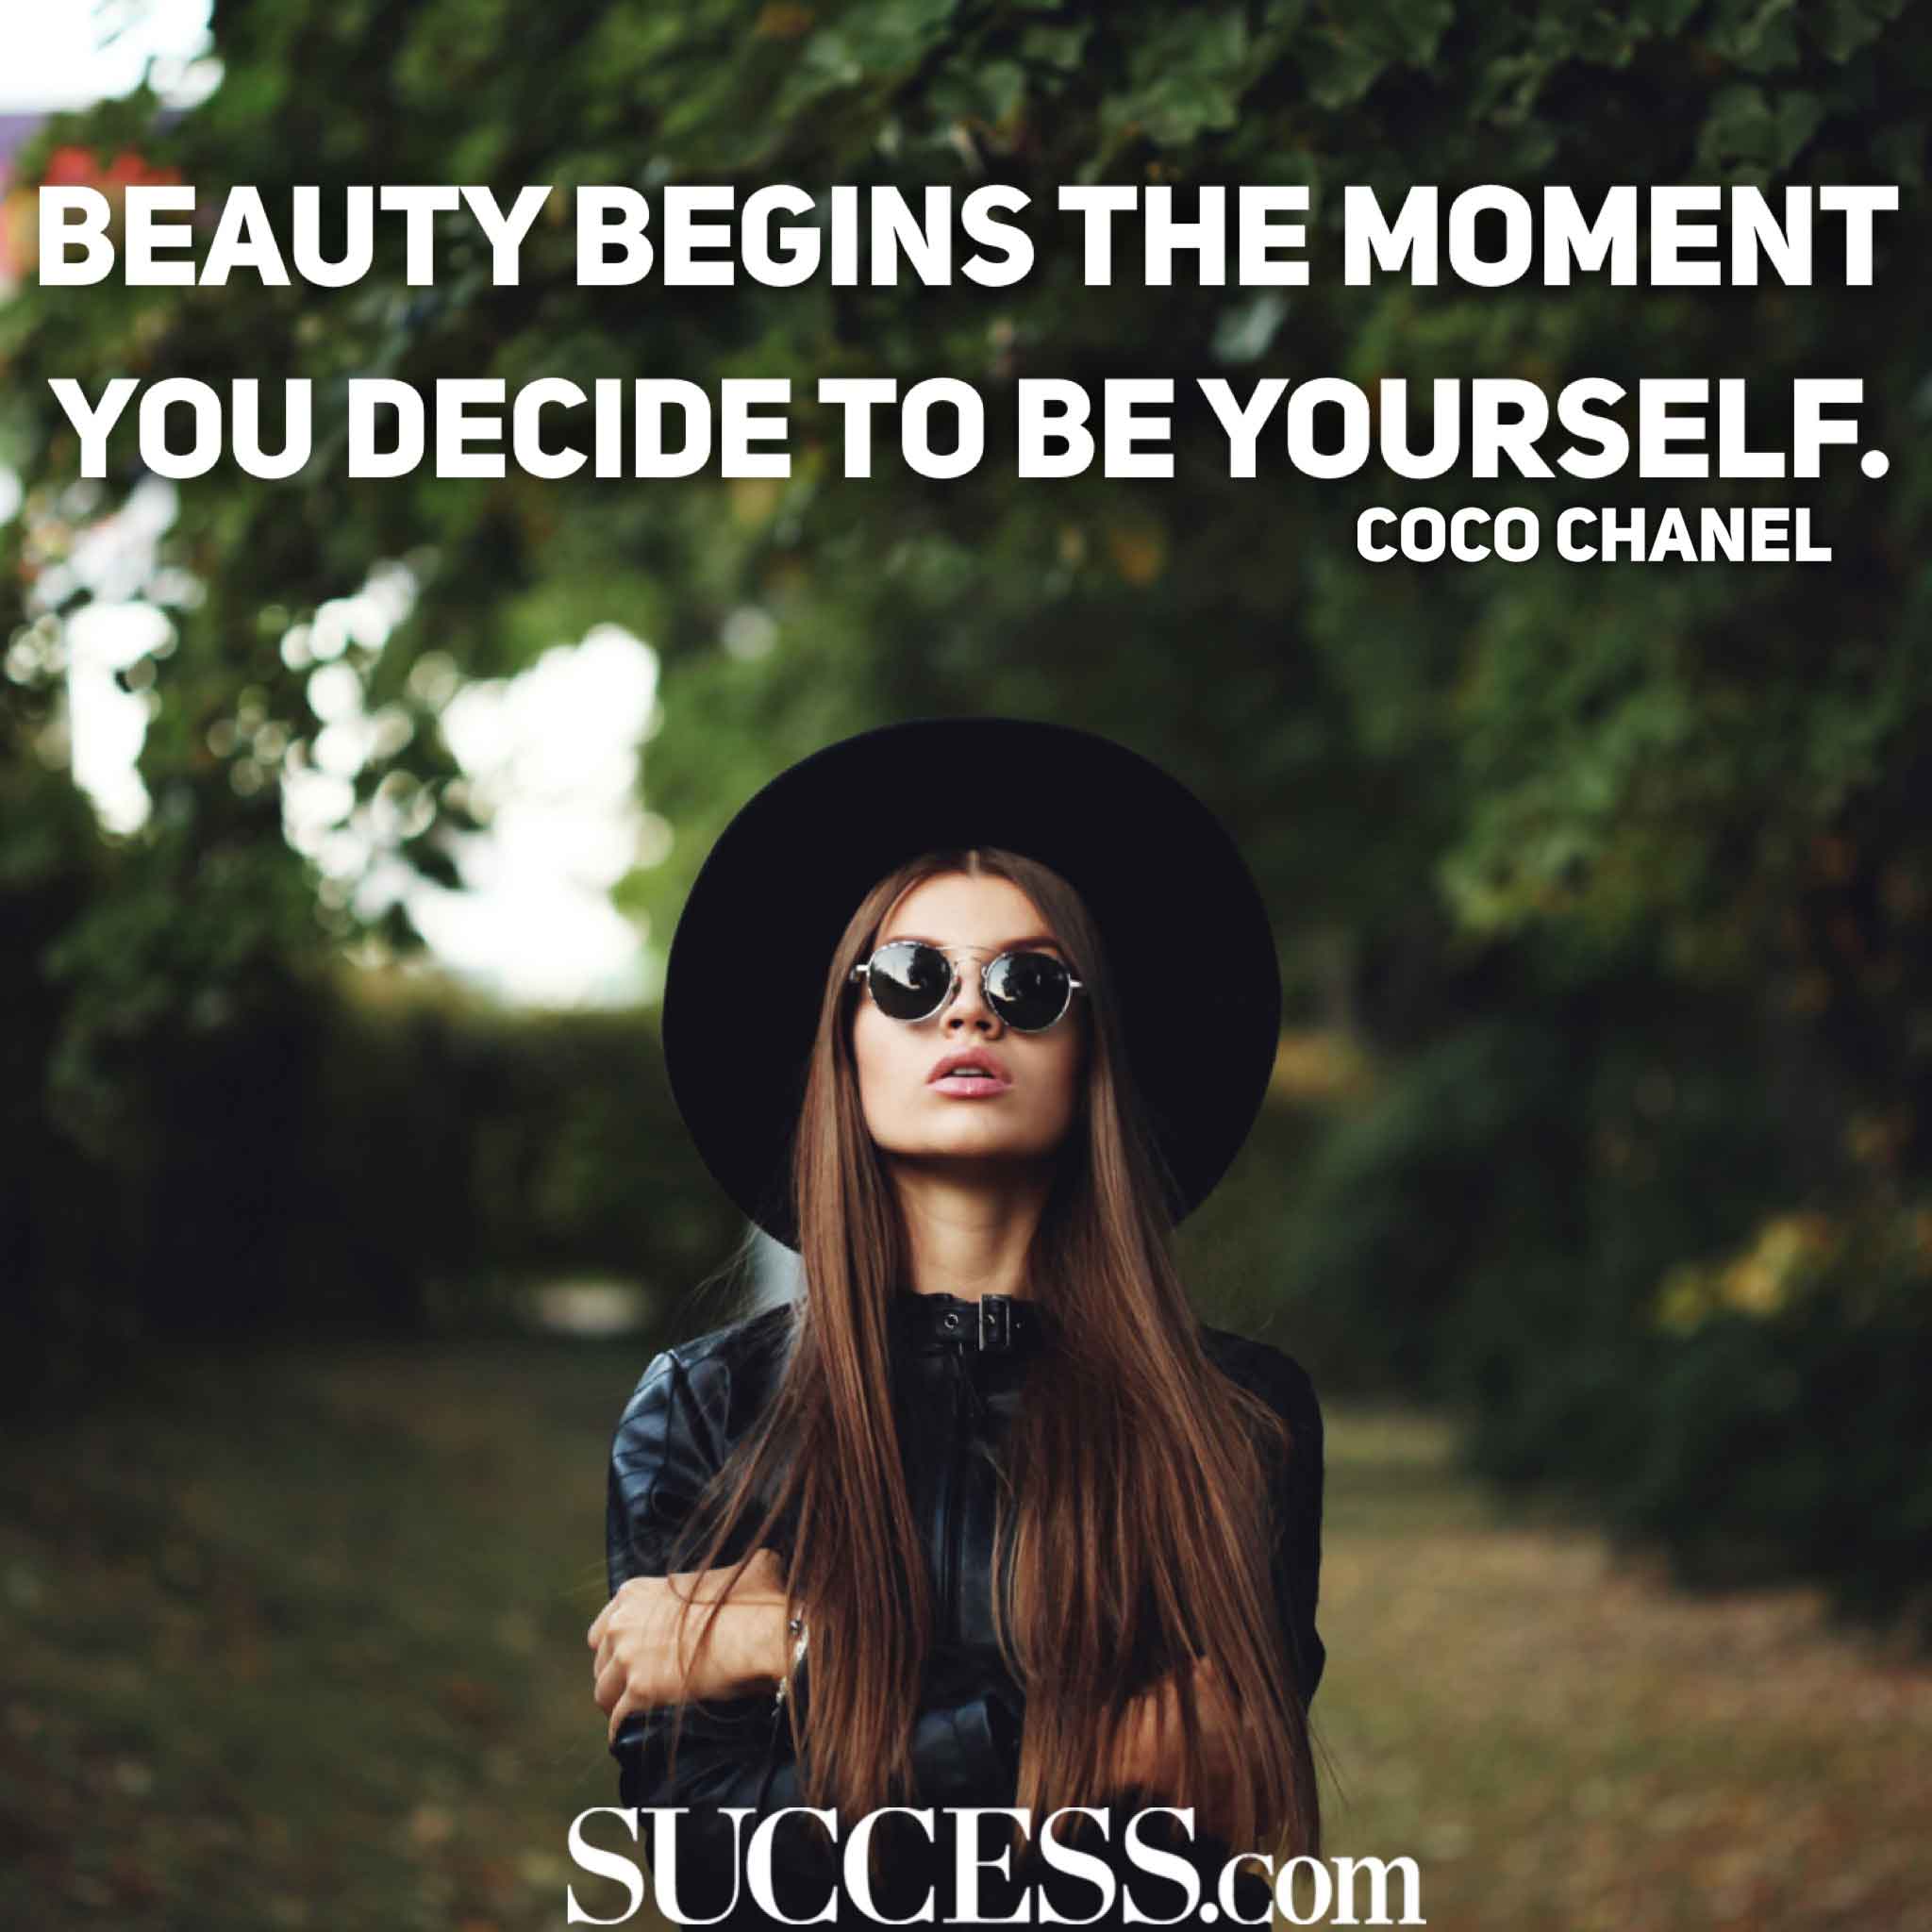 15 Brave Quotes to Inspire You to Be Yourself